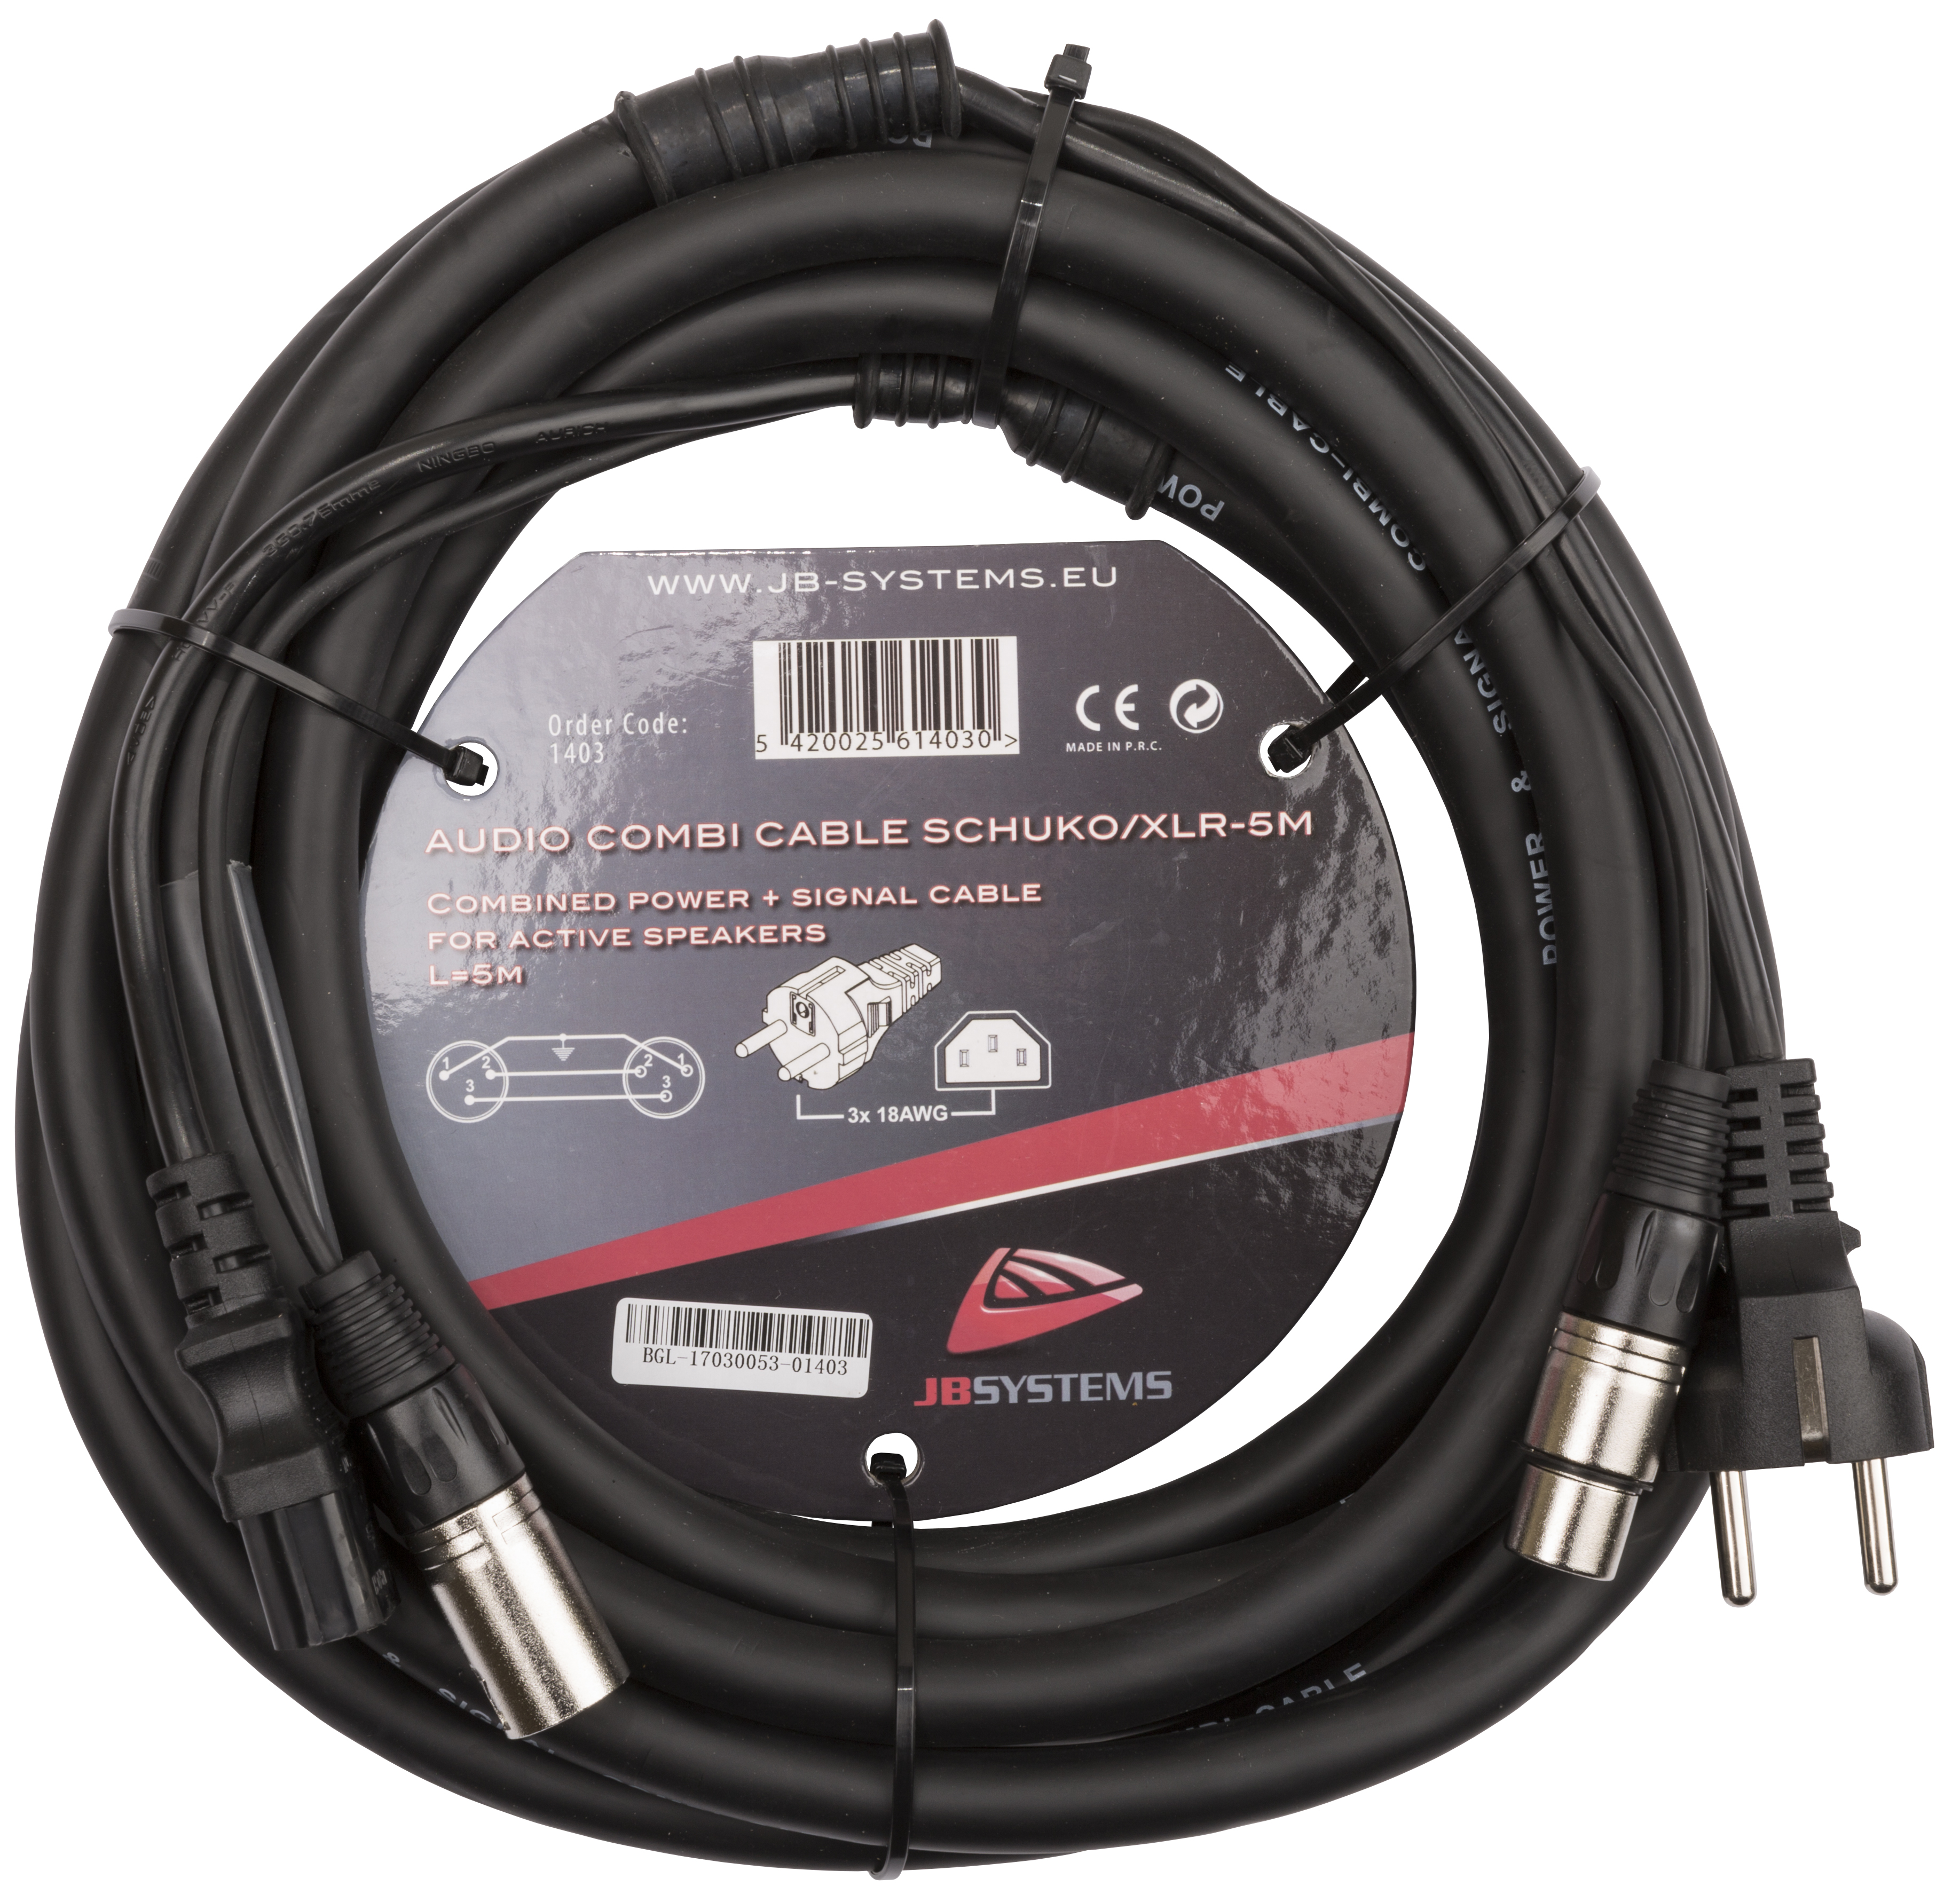 Power and signal combined in one 5m cable : Schuko, IEC and 3pin XLR